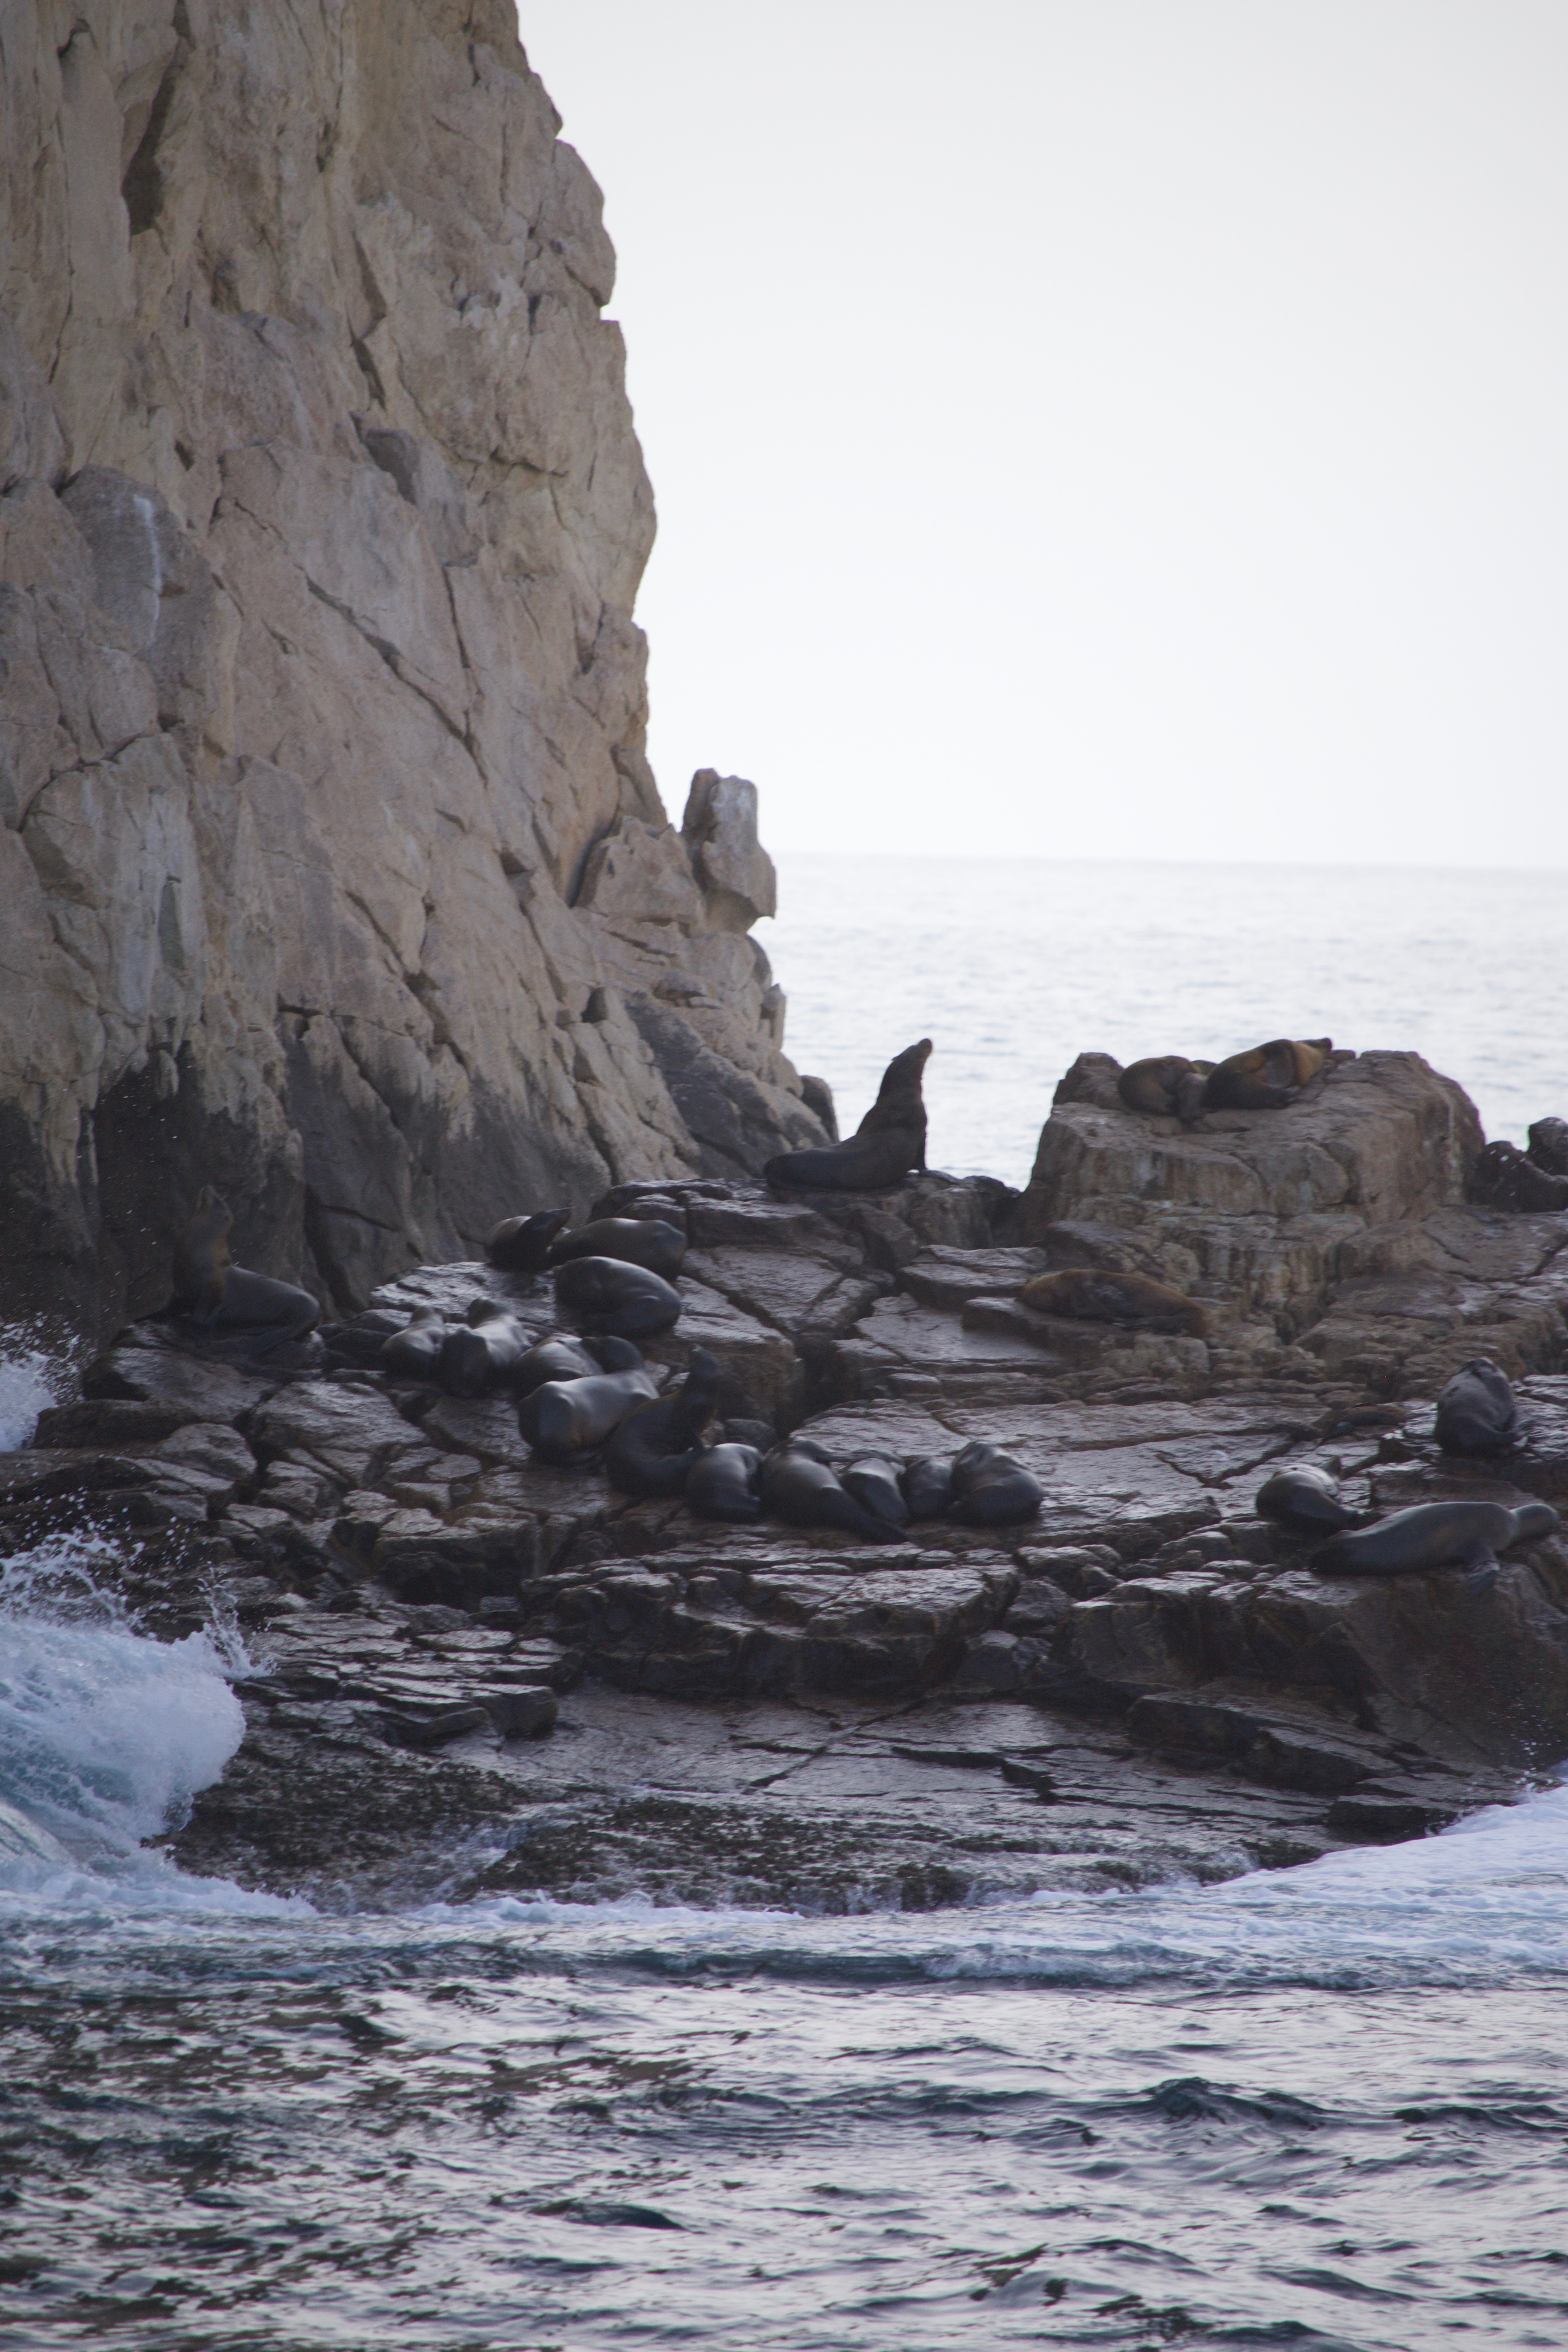 Seals on the rocks at Cabo San Lucas.